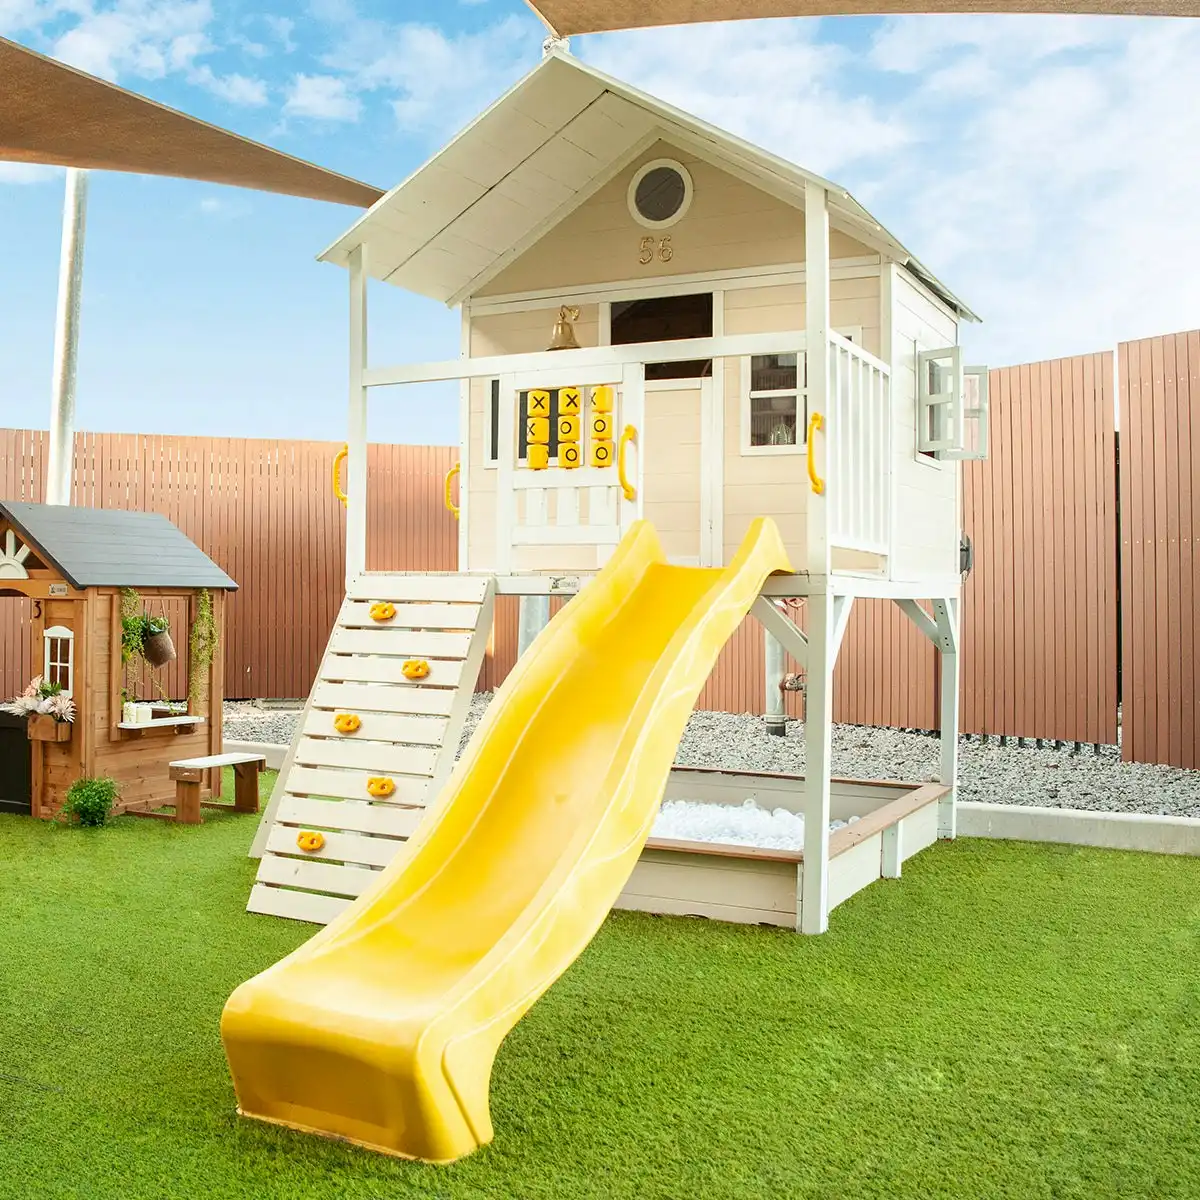 Lifespan Kids Warrigal Cubby House with Yellow Slide